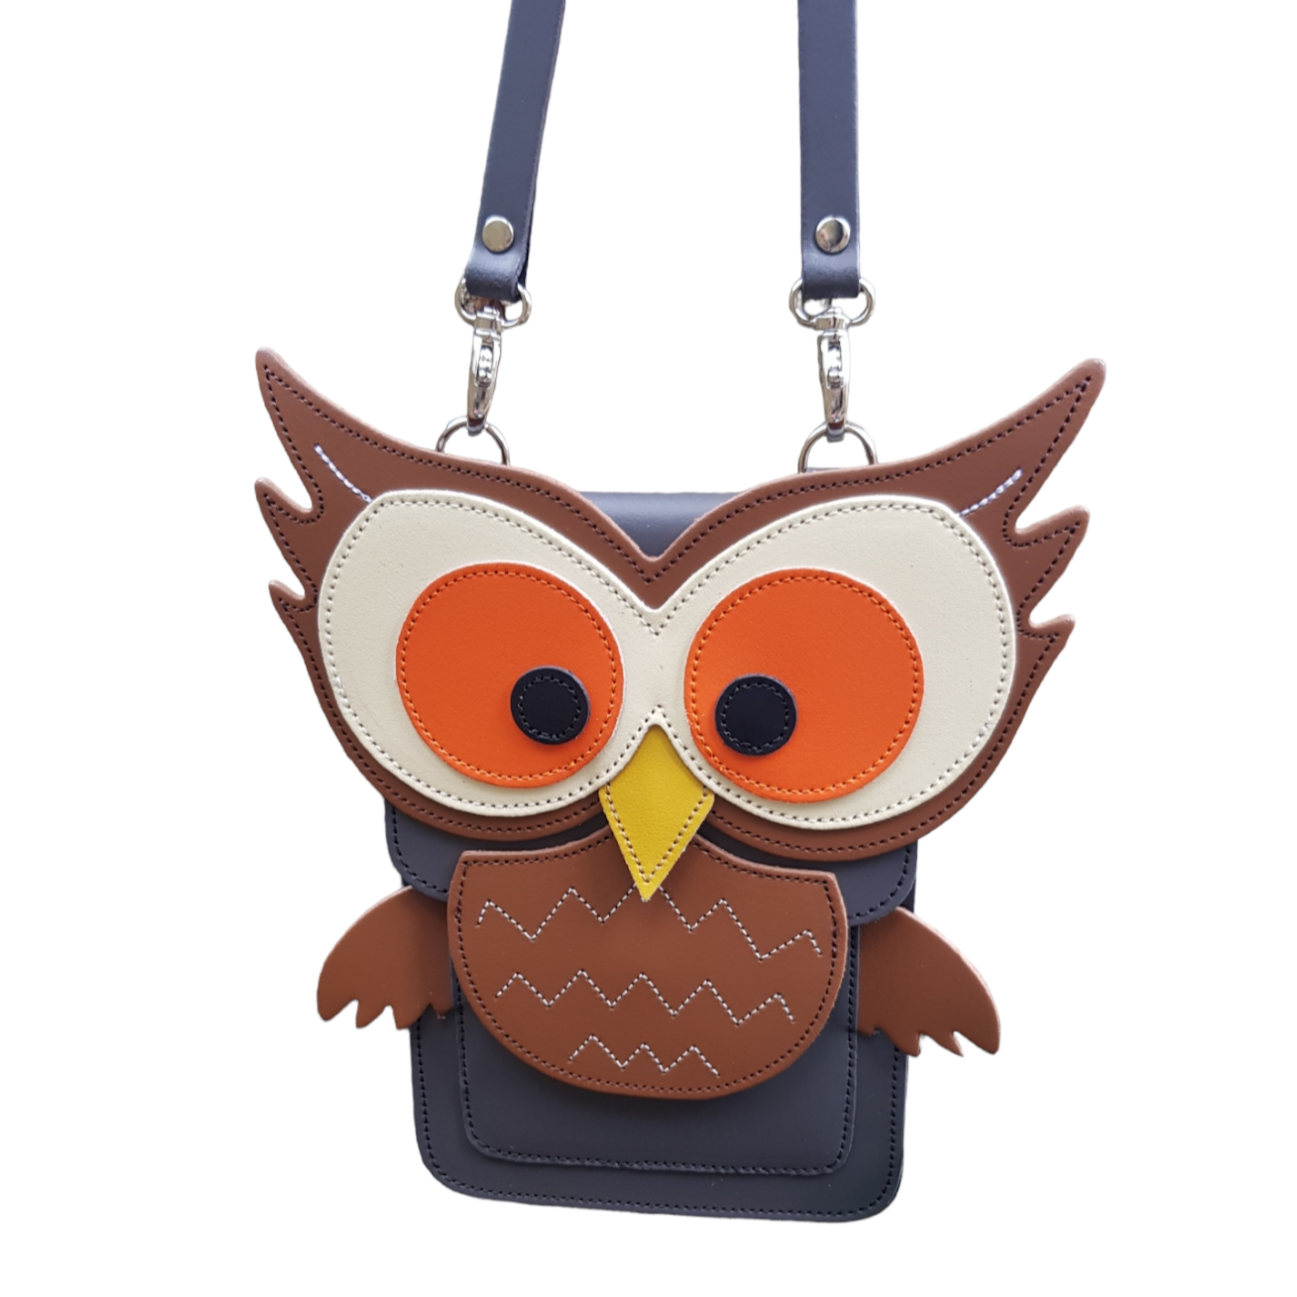 Handmade Leather Mobile Phone Pouch Plus - Hoot Owl - Graphite - Plus